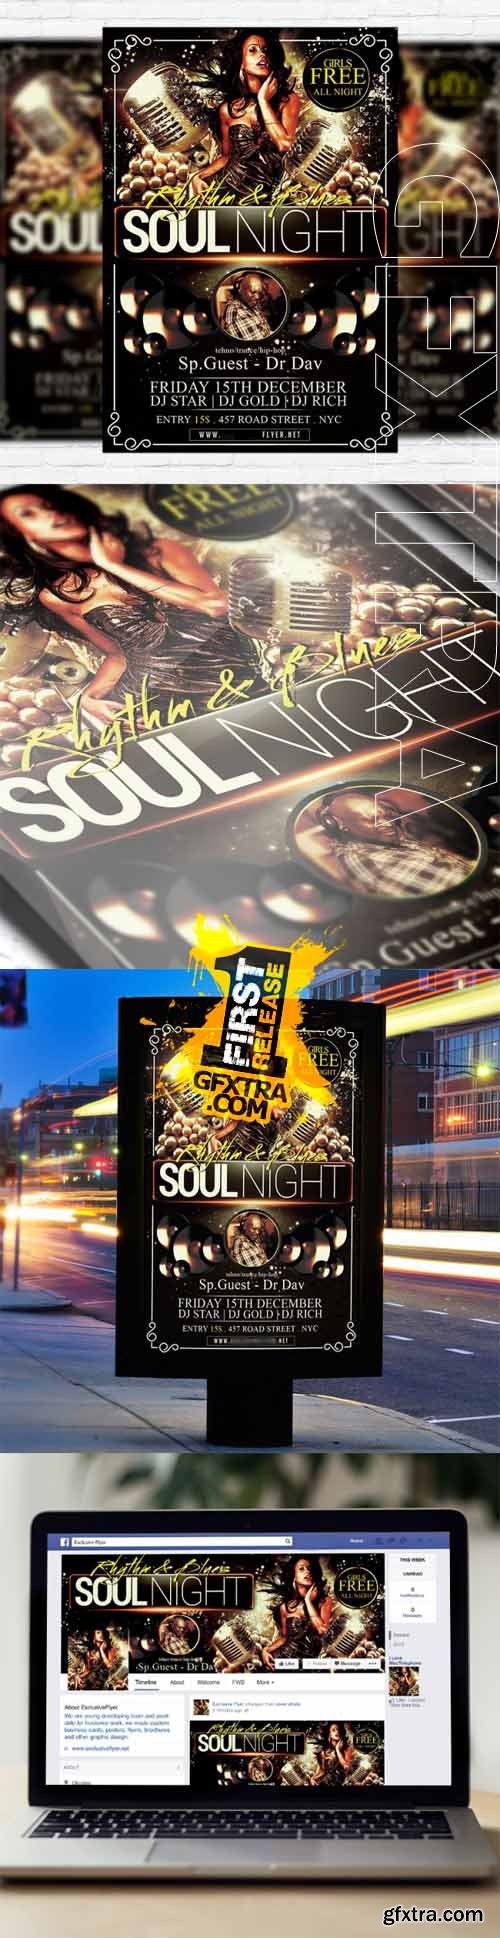 Soul Night - Flyer Template + Facebook Cover